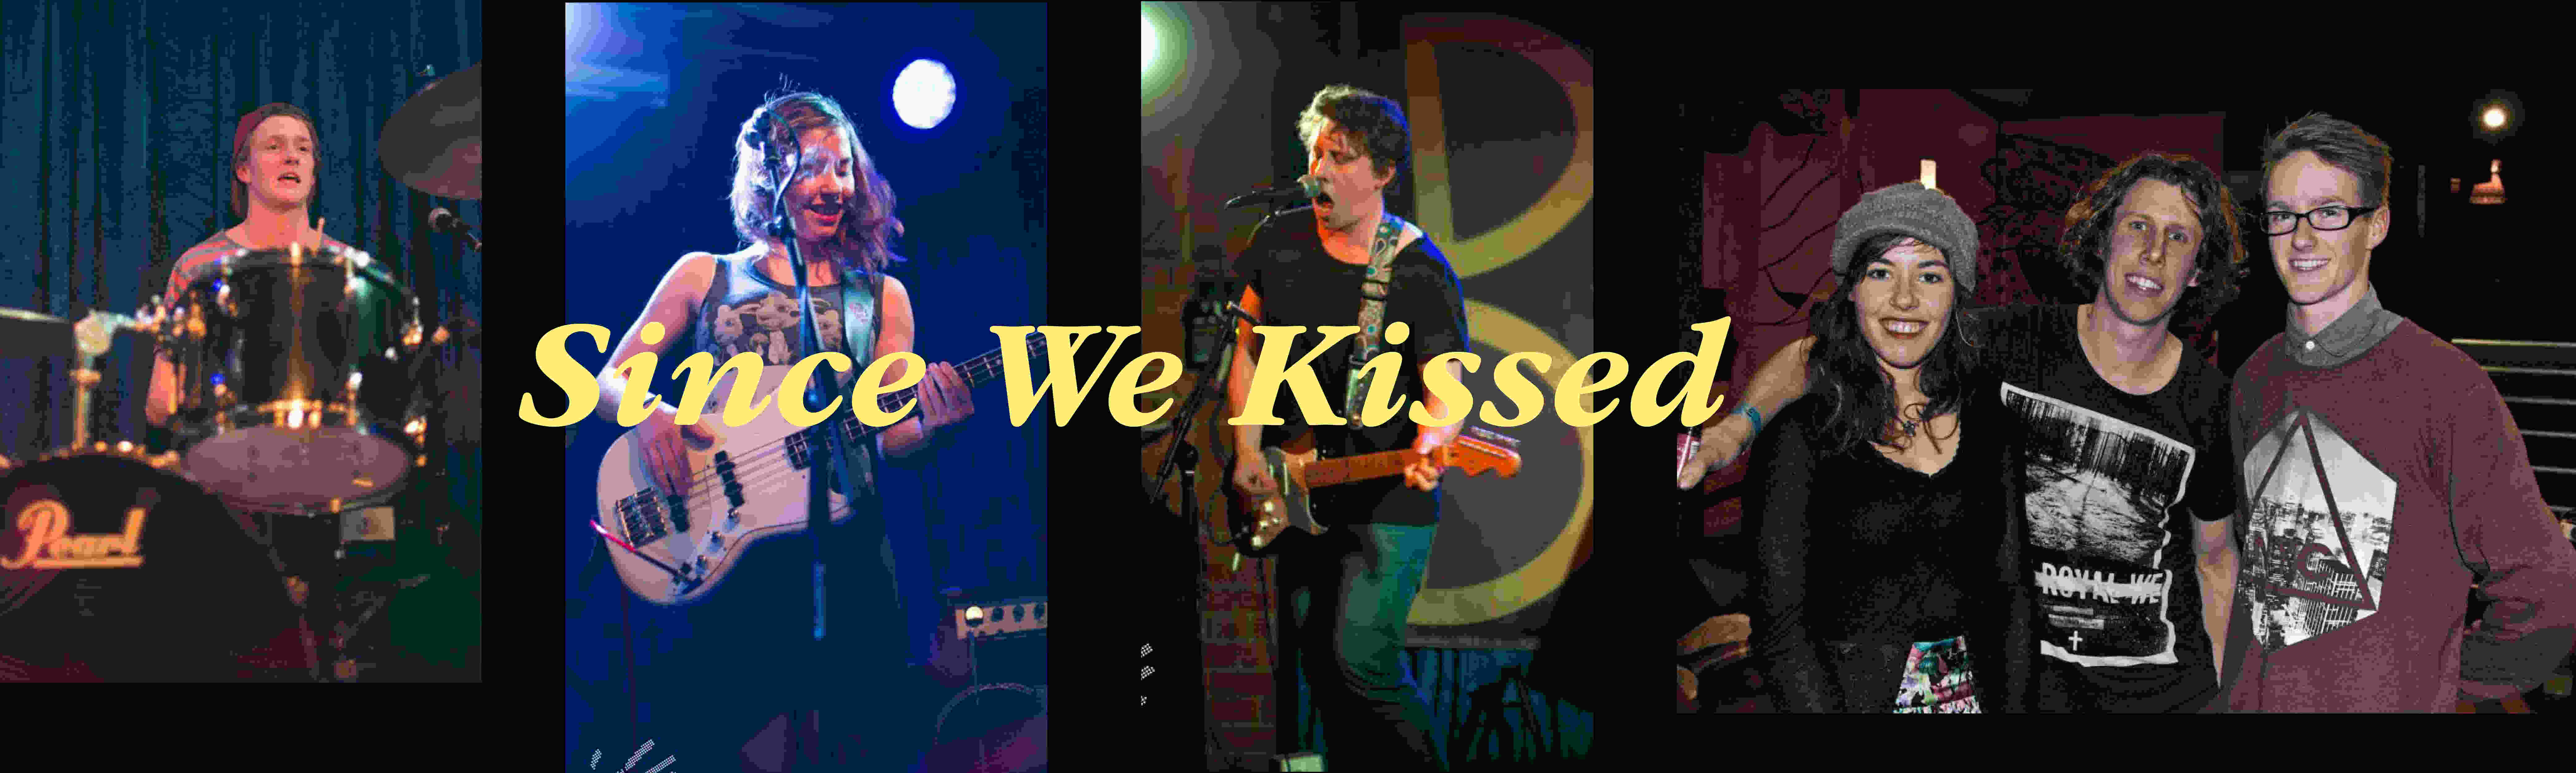 Since We Kissed